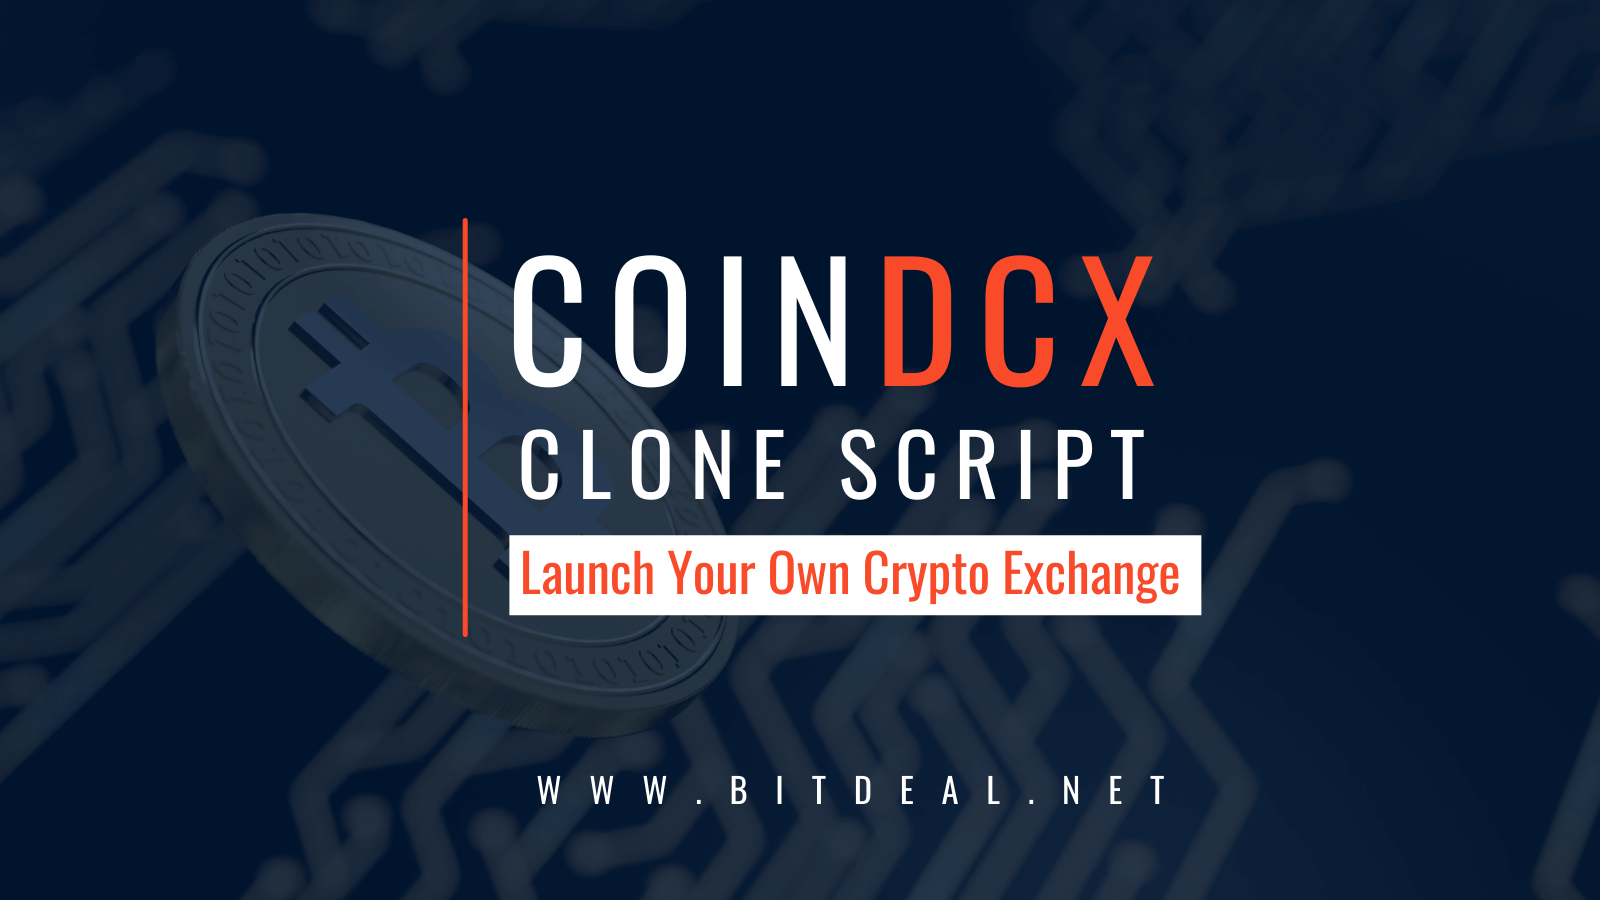 CoinDCX Clone Script to Start a Cryptocurrency Exchange like CoinDCX